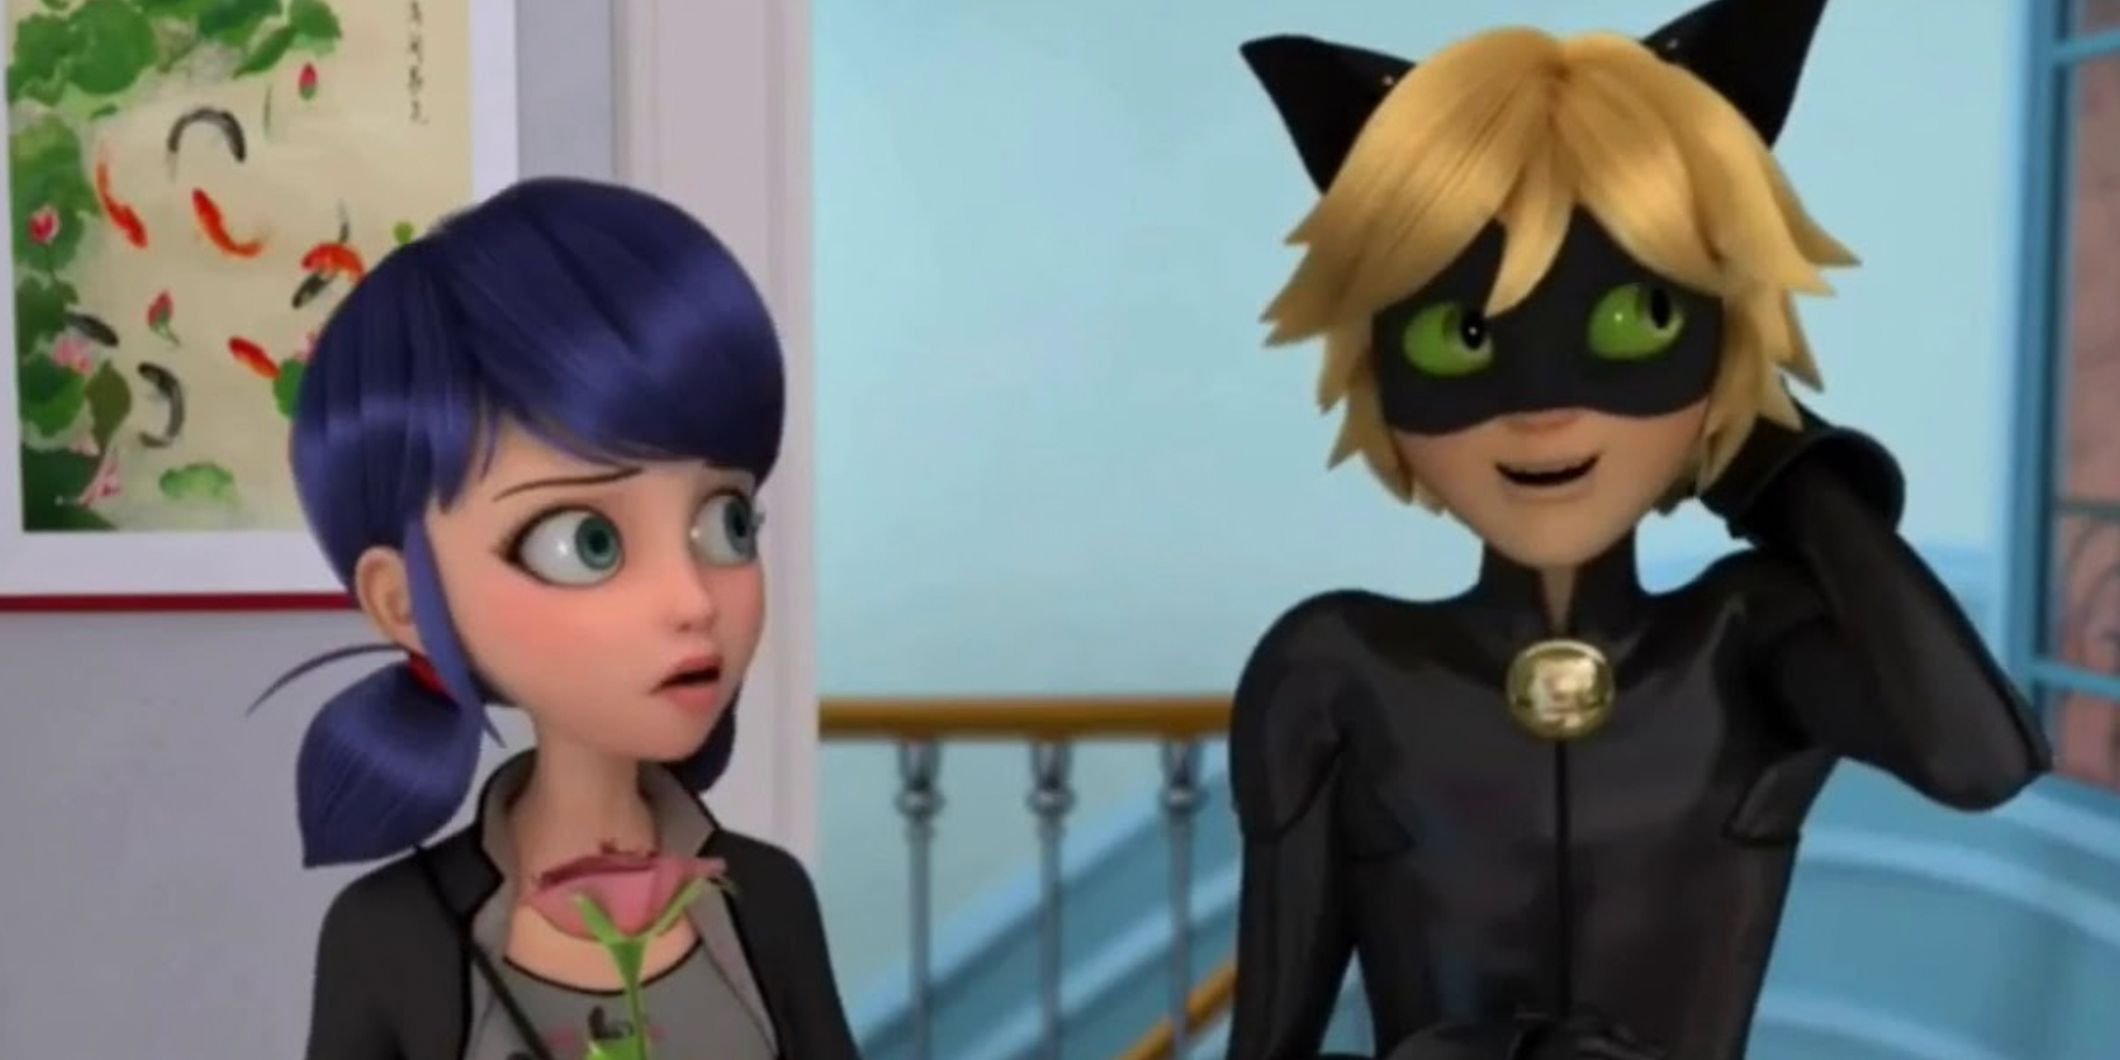 Marinette gets a flower from Cat Noir in the Miraculous Ladybug episode Weredad